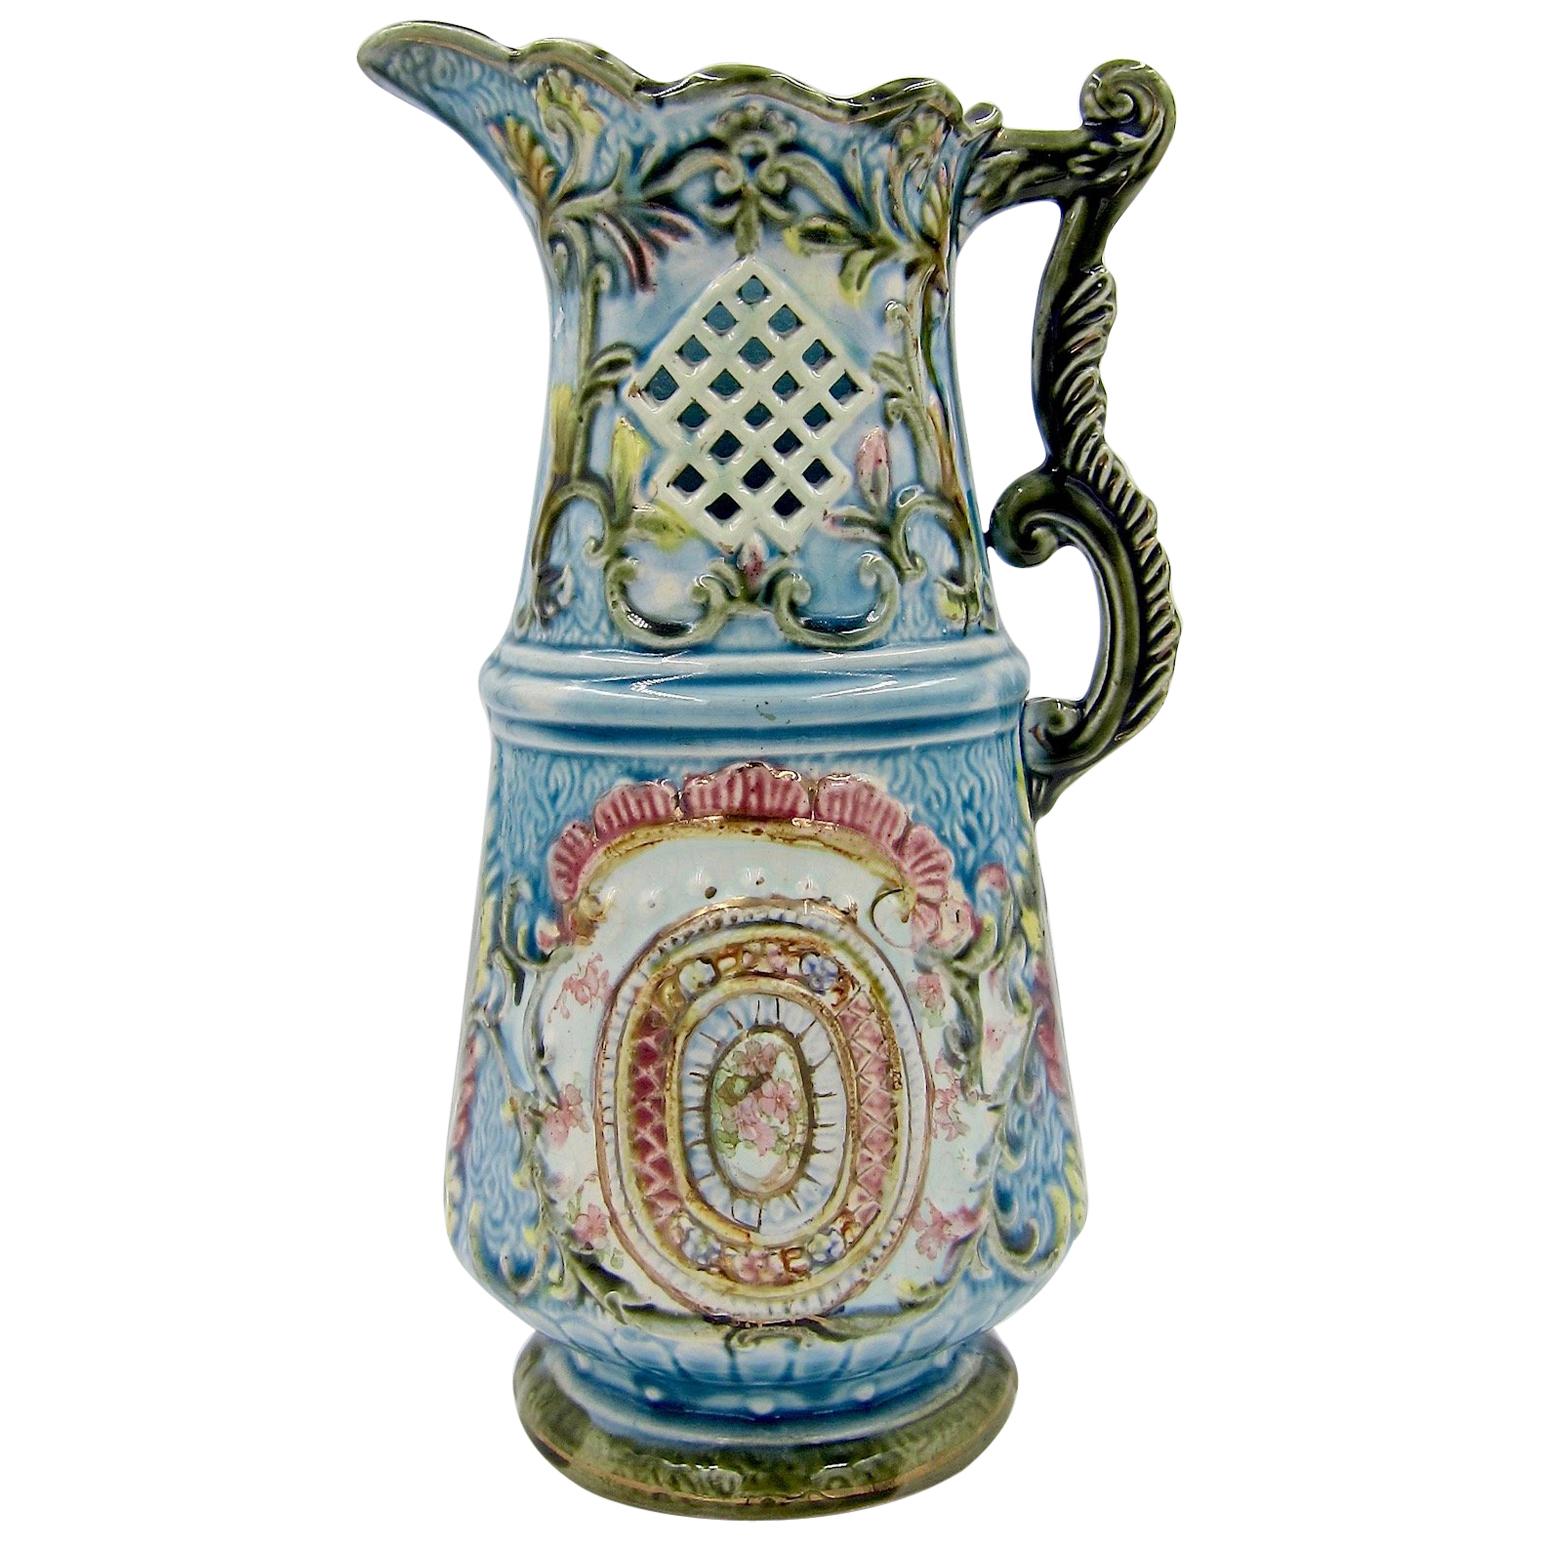 Antique Continental Hand-Painted Majolica Pitcher Vase